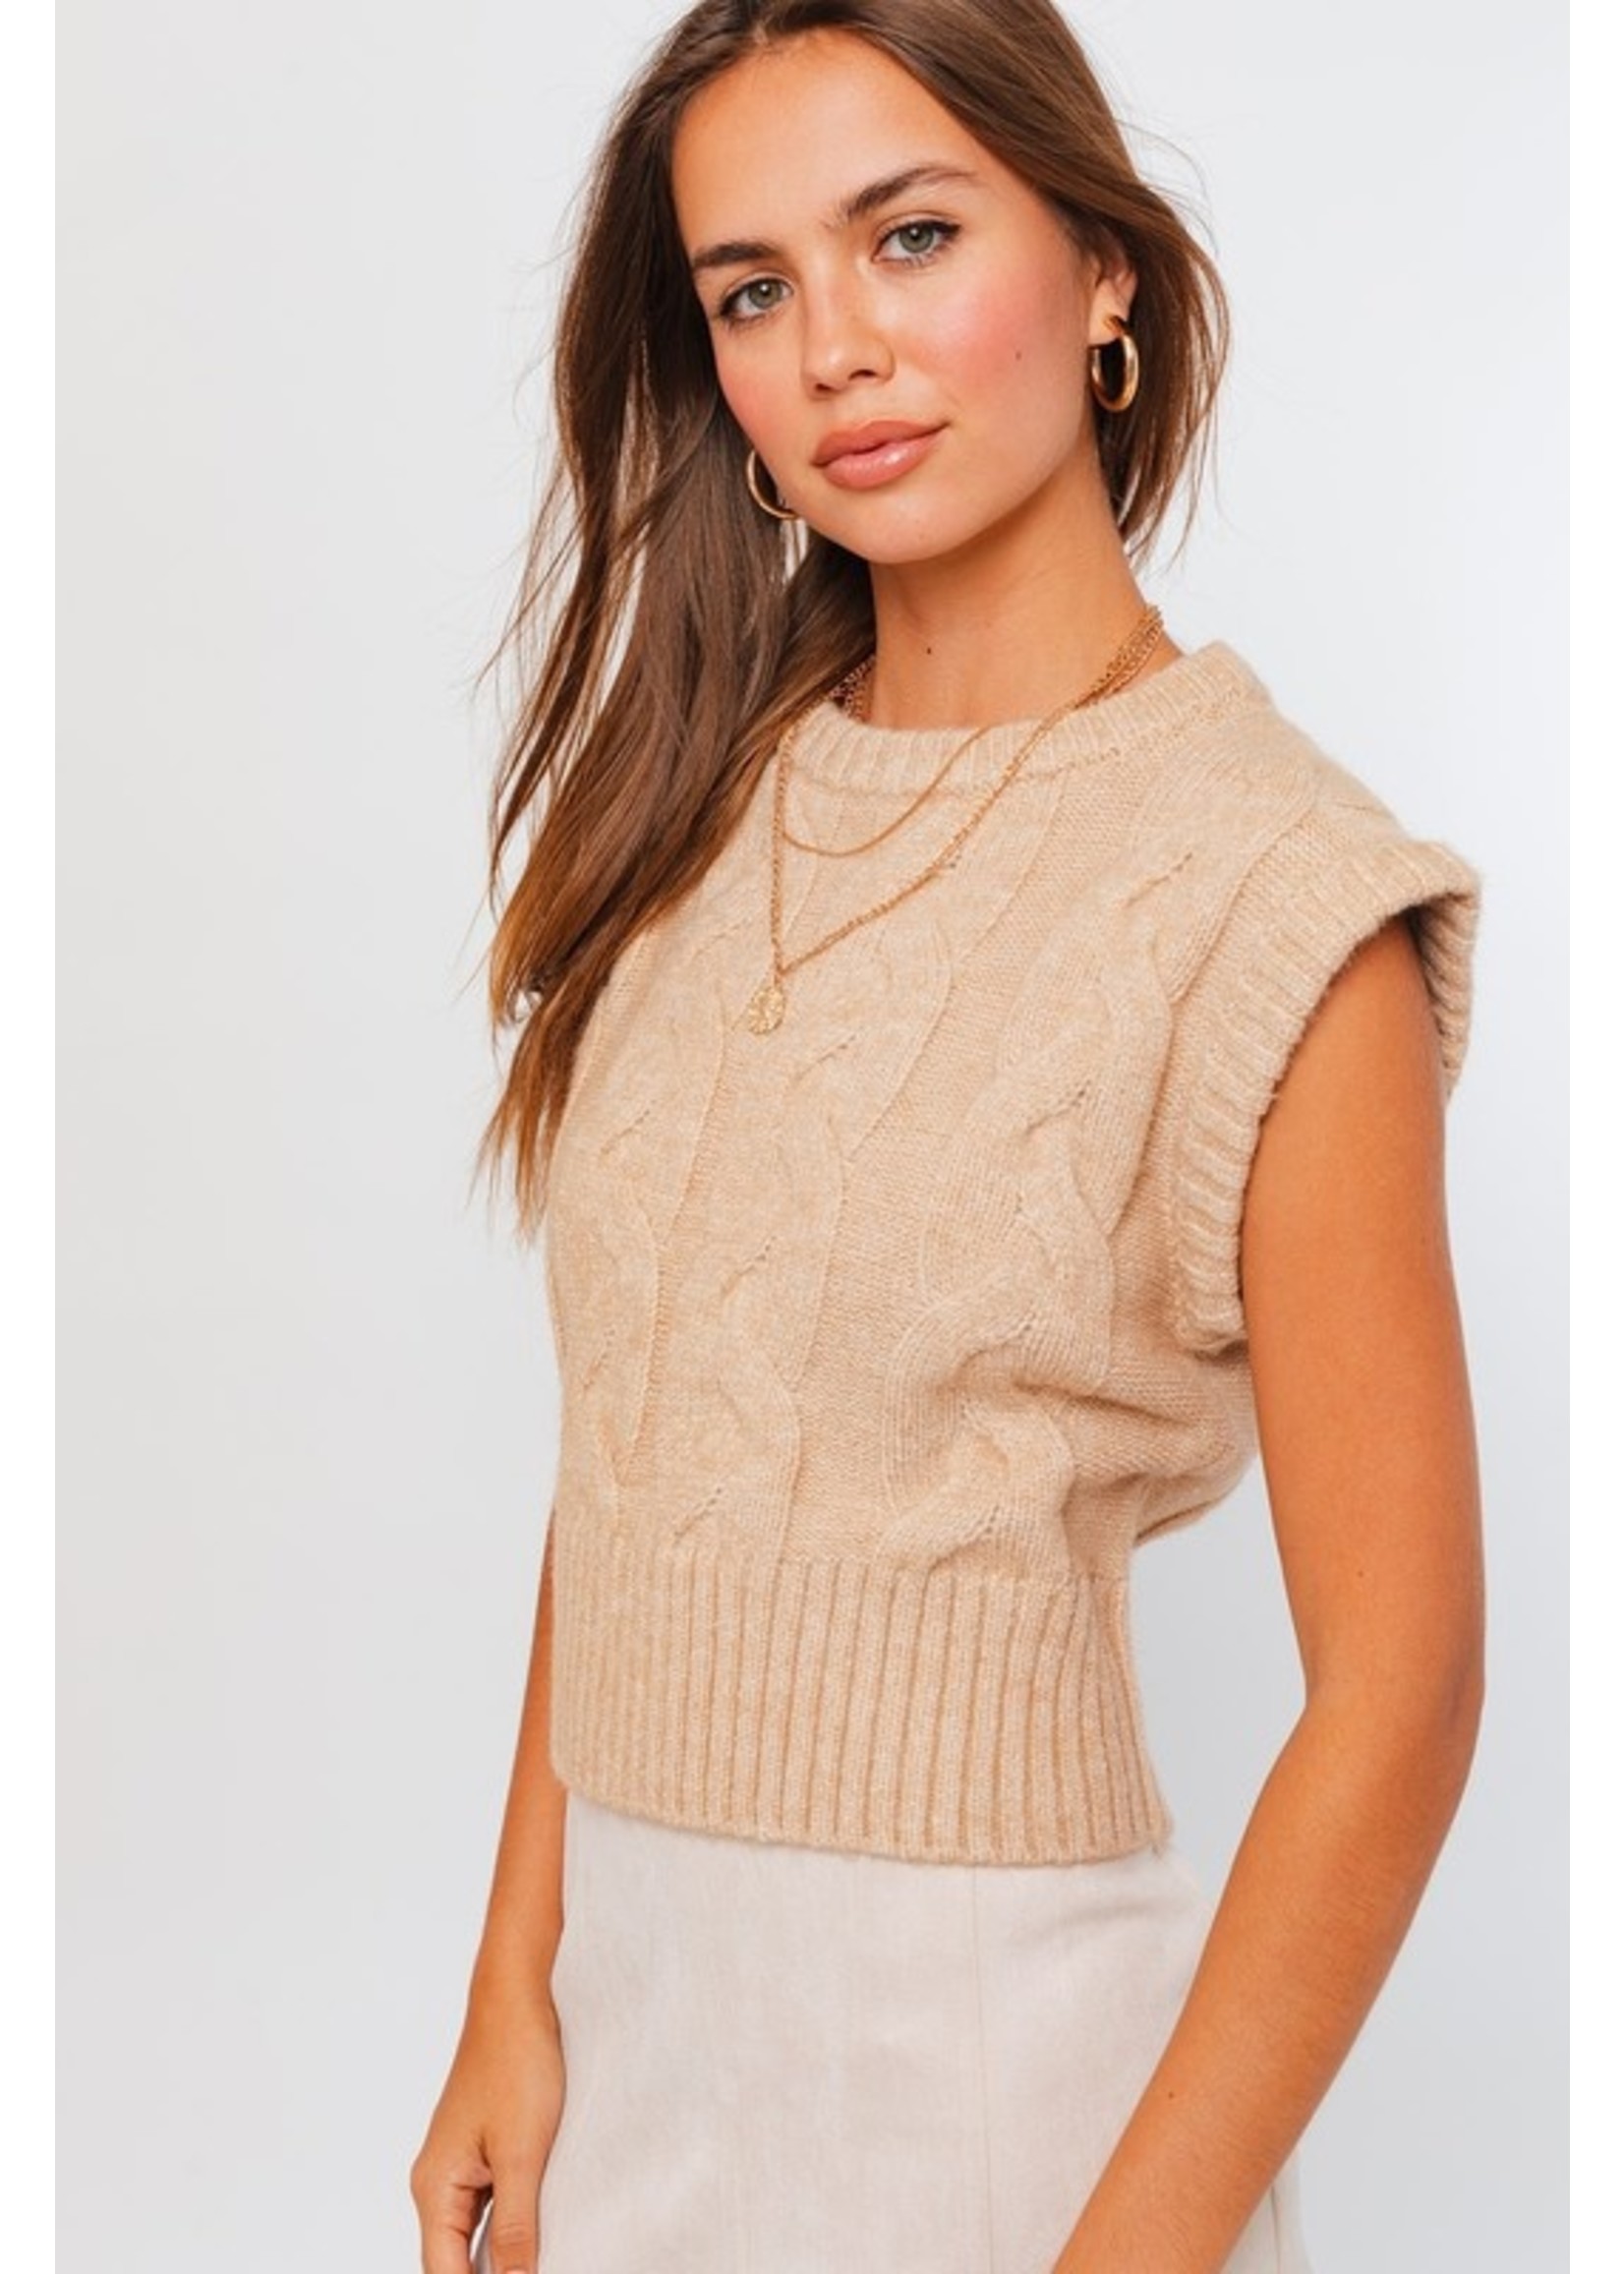 Le Lis Muscle Sleeve Cable Sweater Top- MWT5823